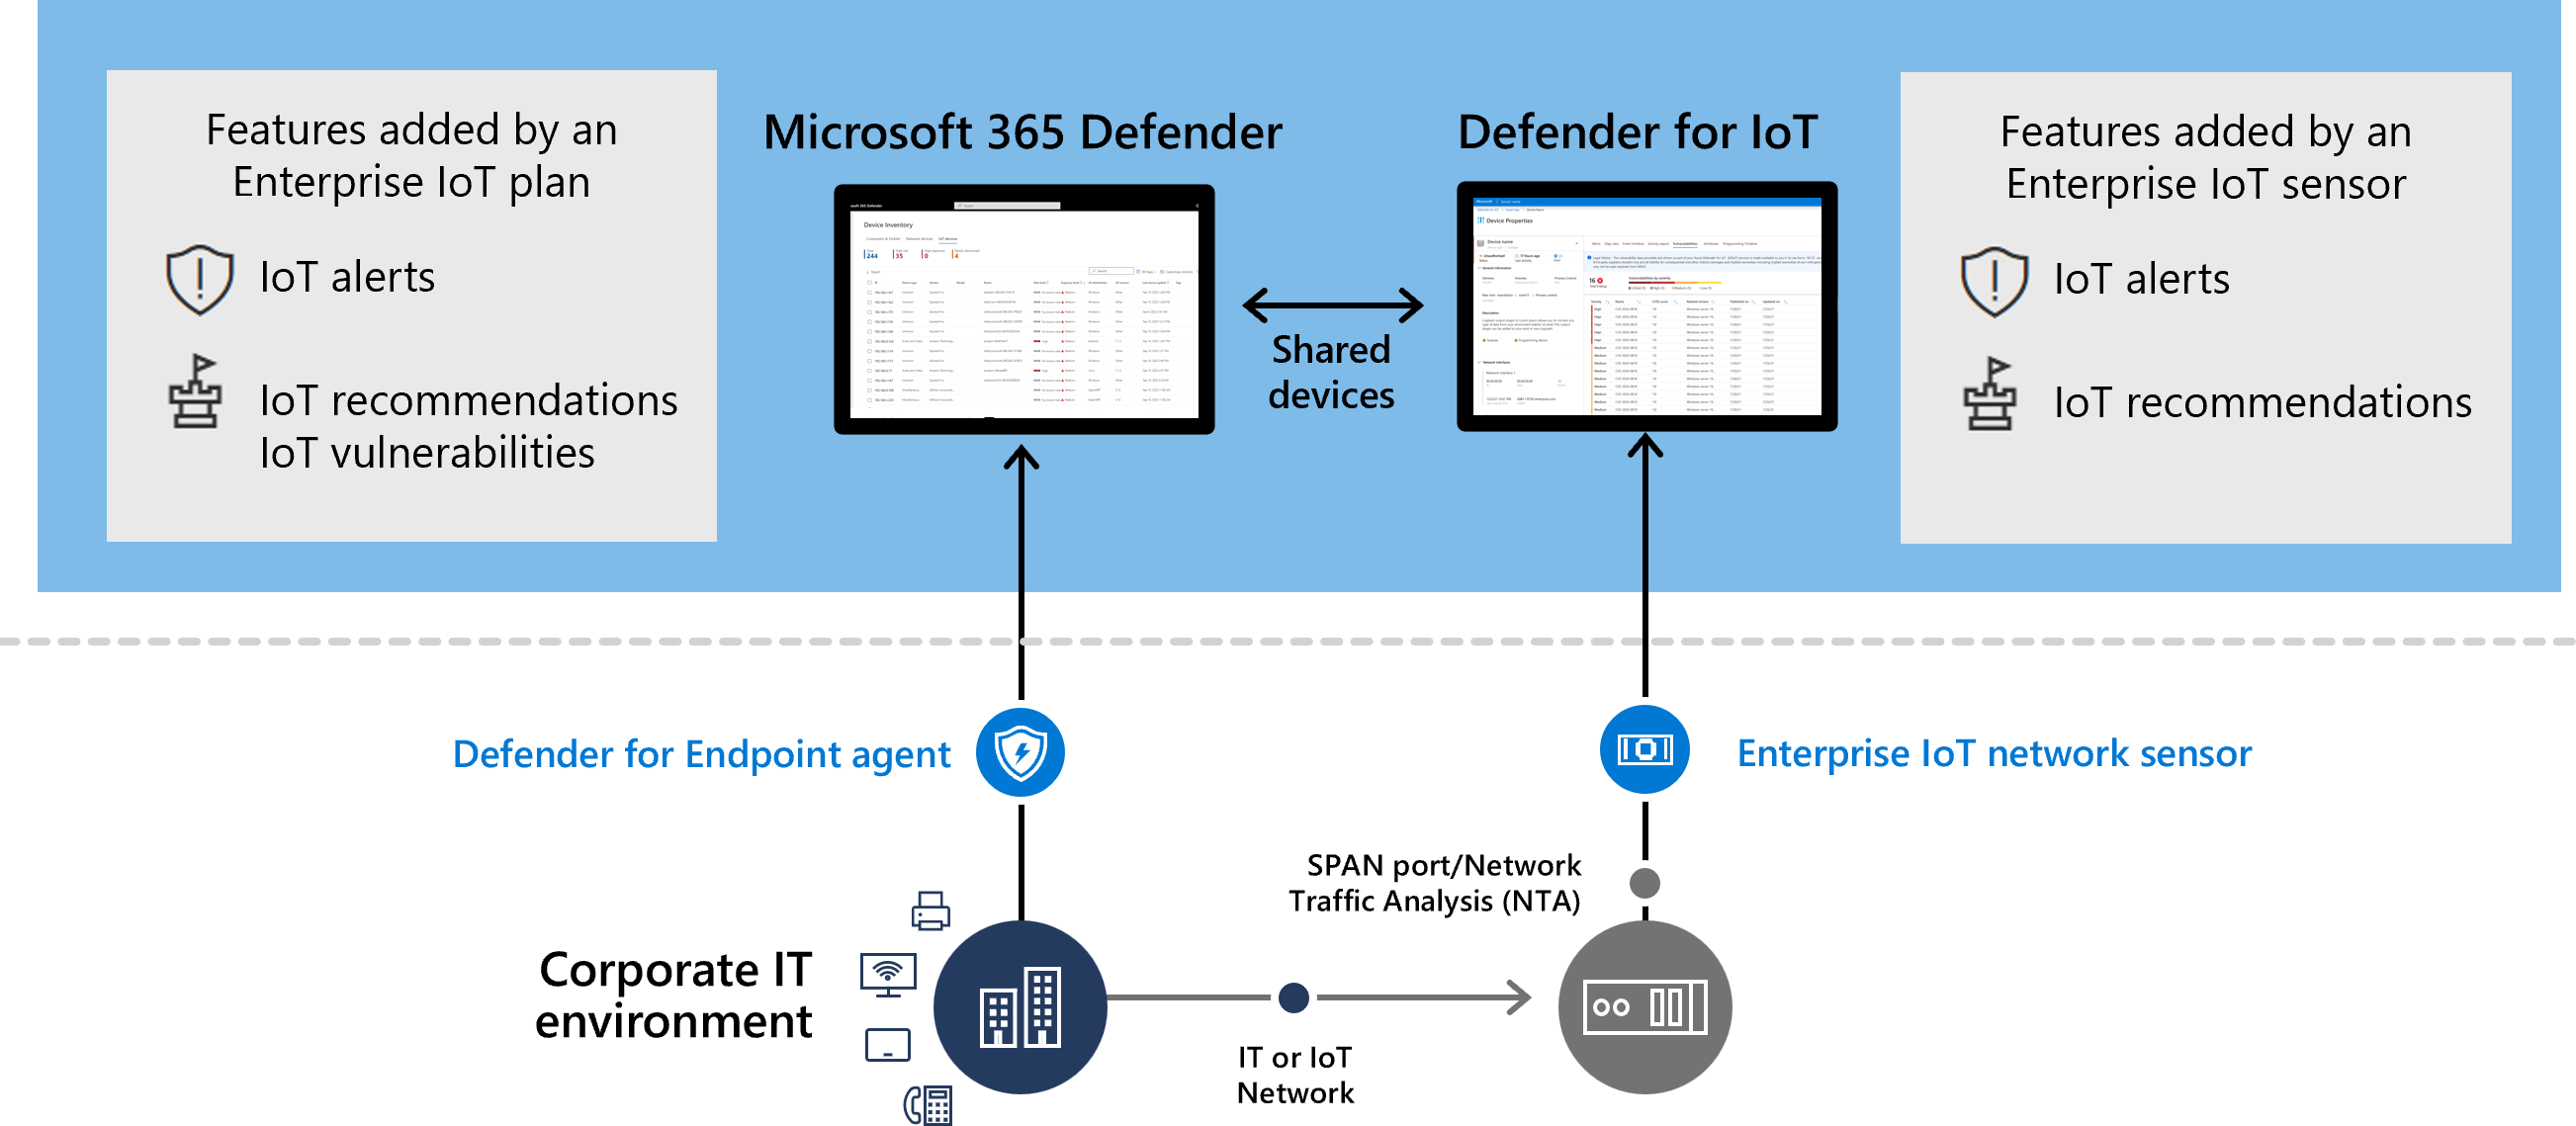 Diagram of an Enterprise IoT sensor connected to Defender for IoT with an Enterprise IoT plan in Microsoft 365 Defender.